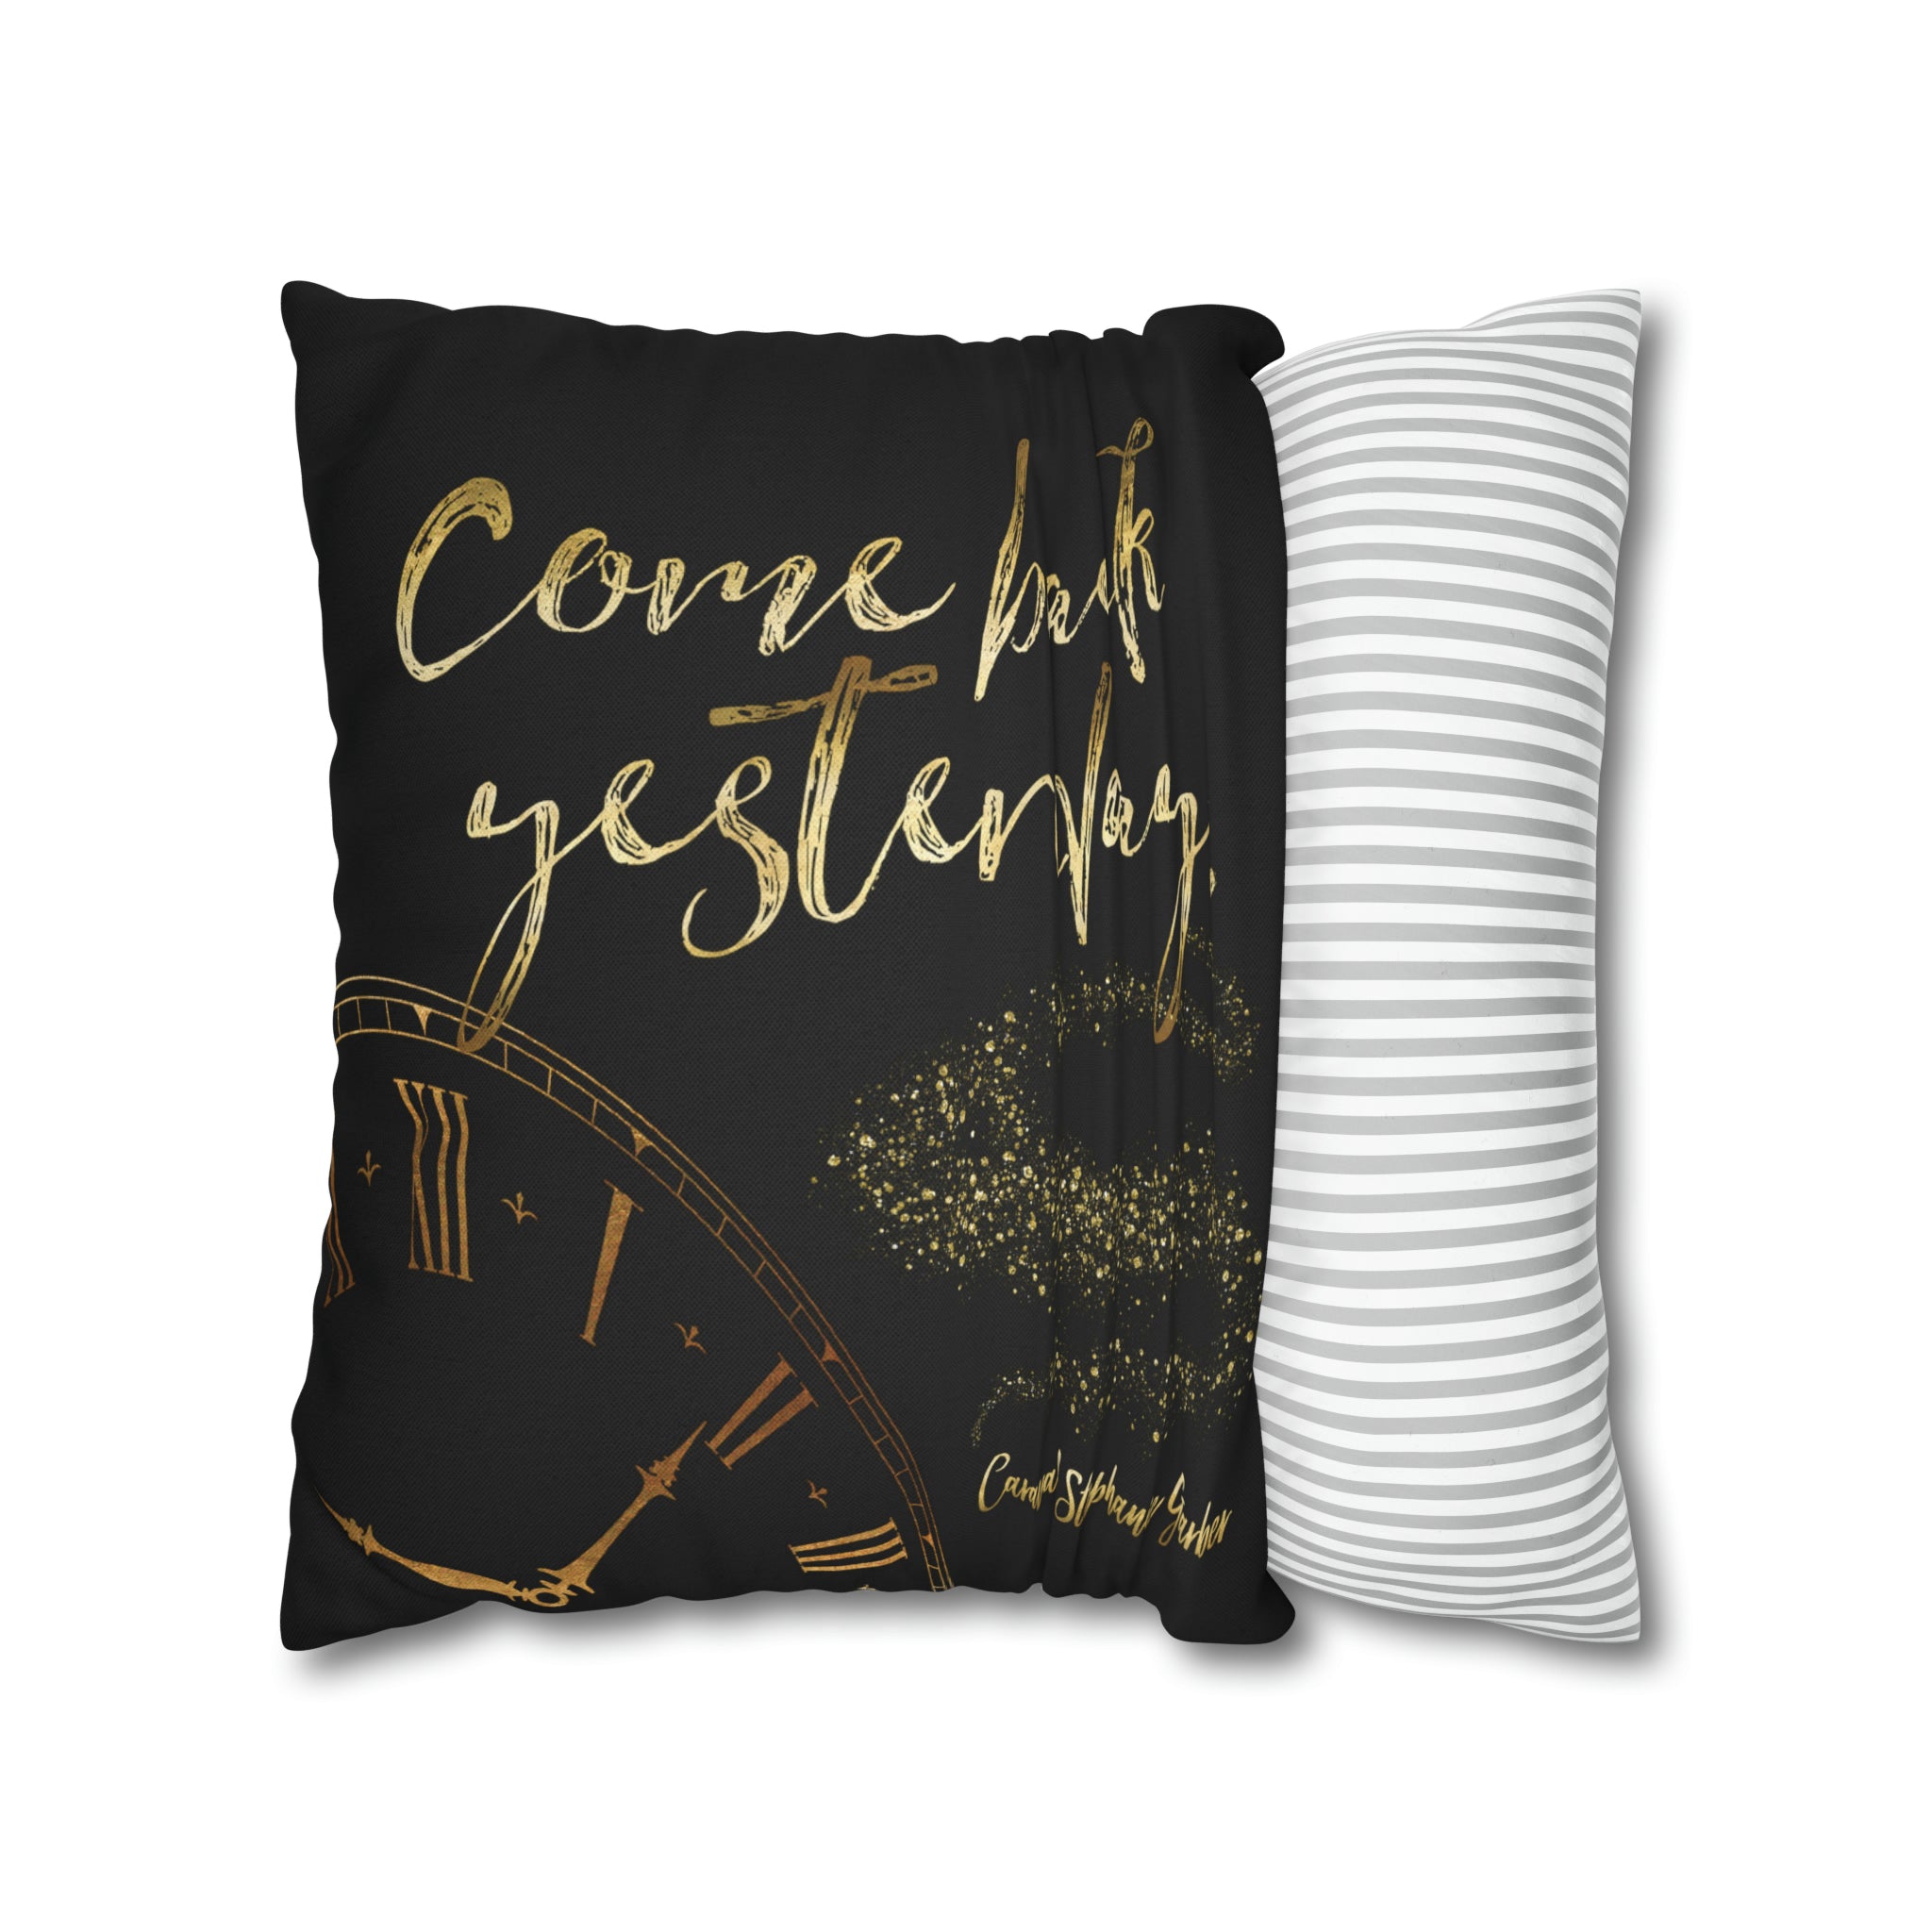 Come back yesterday. Caraval Pillow